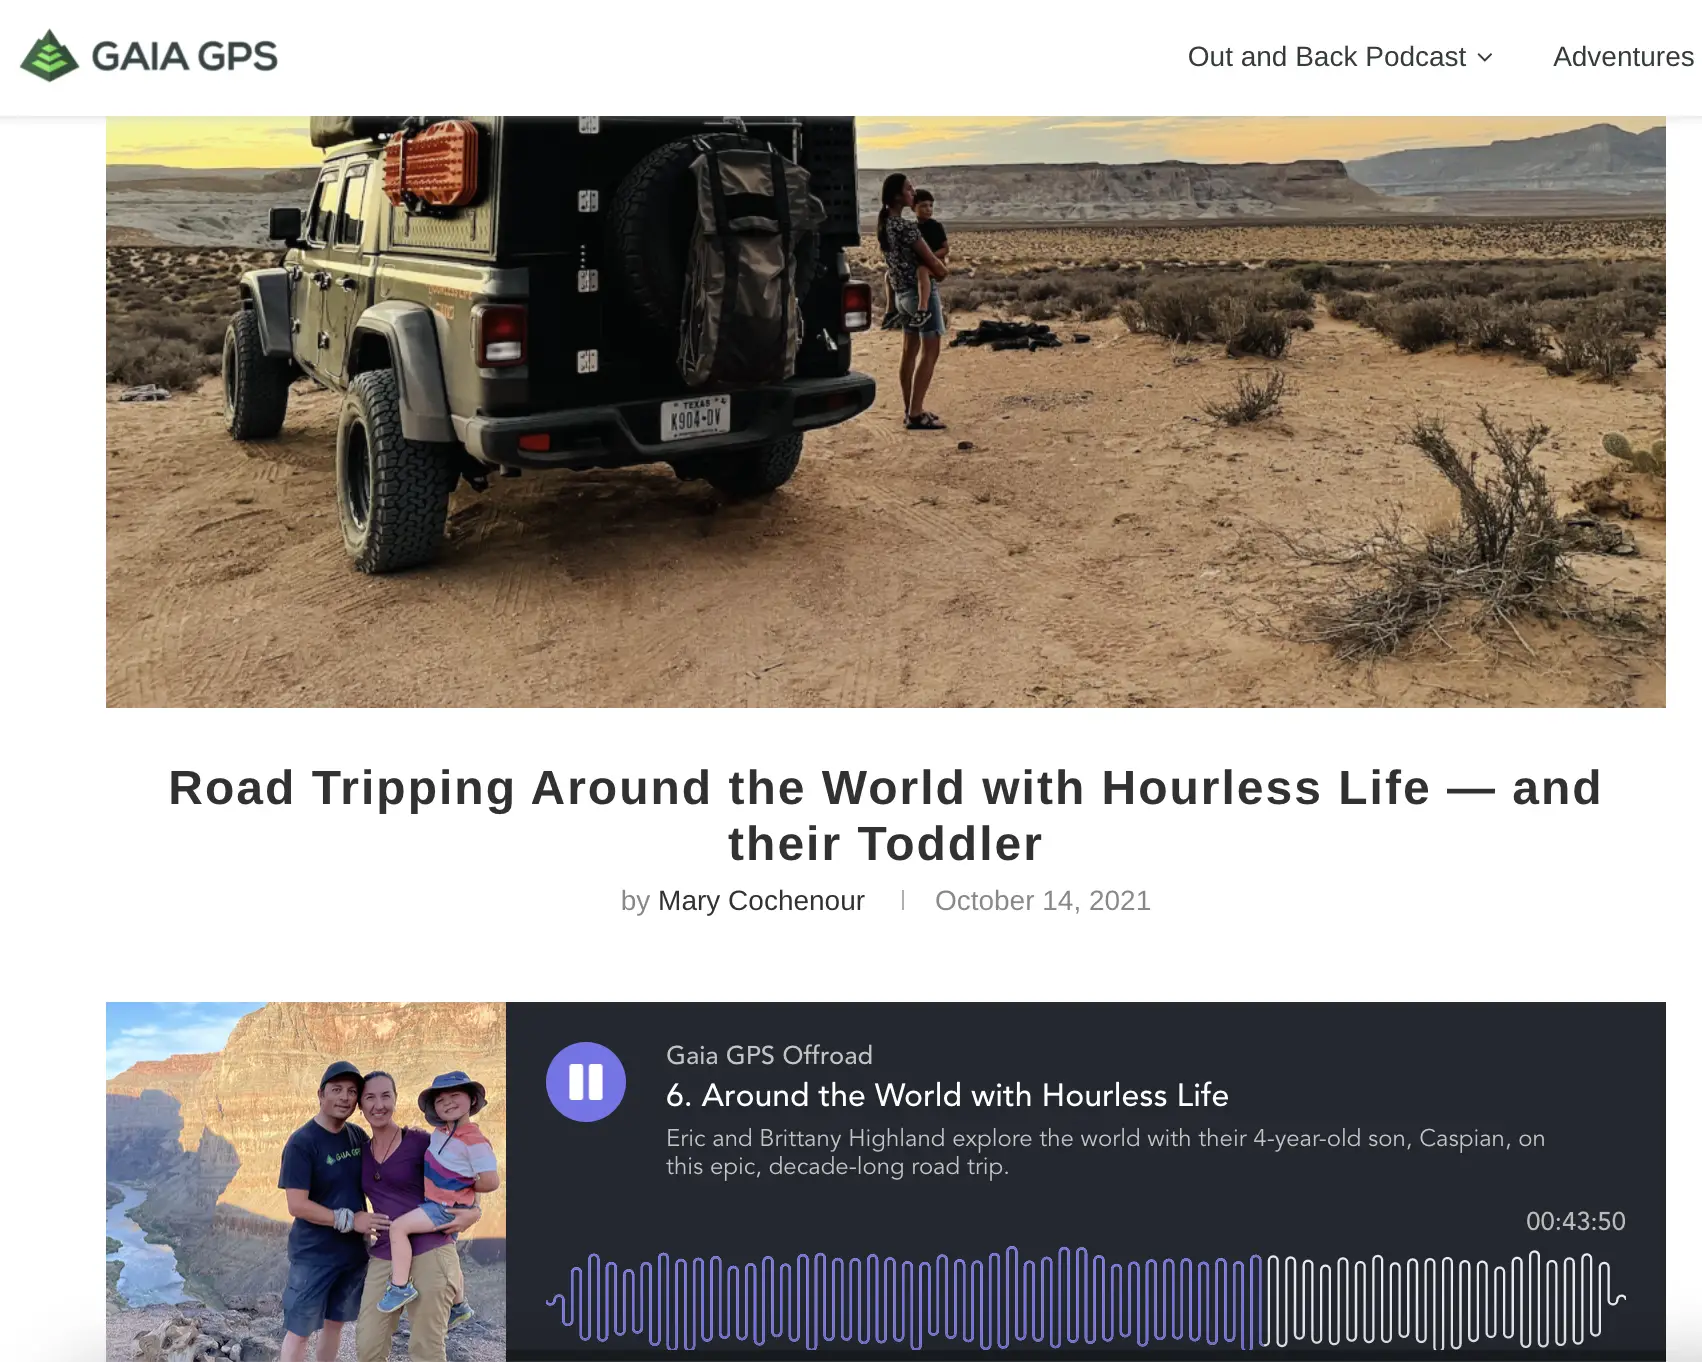 Gaia GPS Offroad Podcast Interview